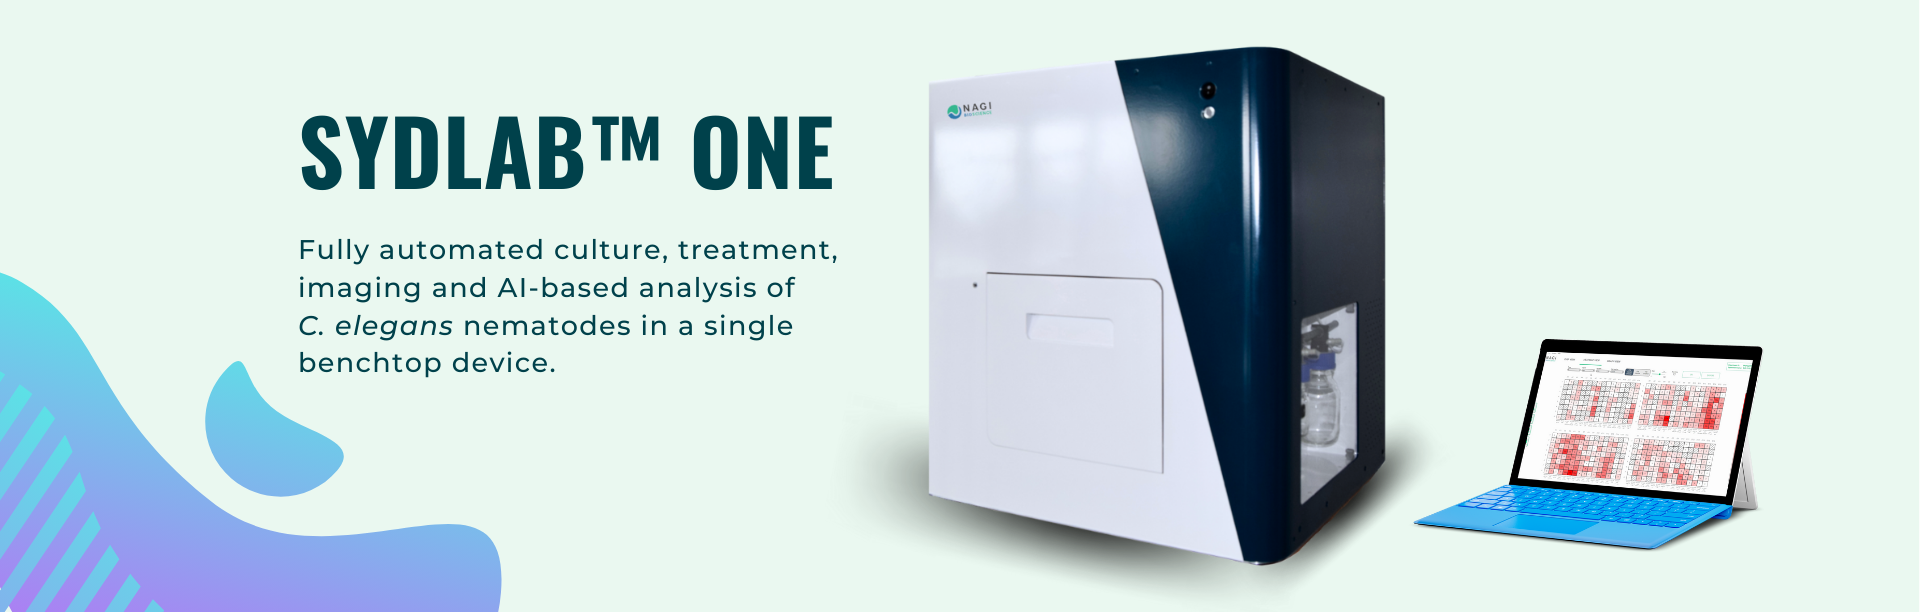 Nagi Bioscience SydLab One. Fully automated culture, treatment, imaging and AI-based analysis of C. elegans nematodes in a single benchtop device.